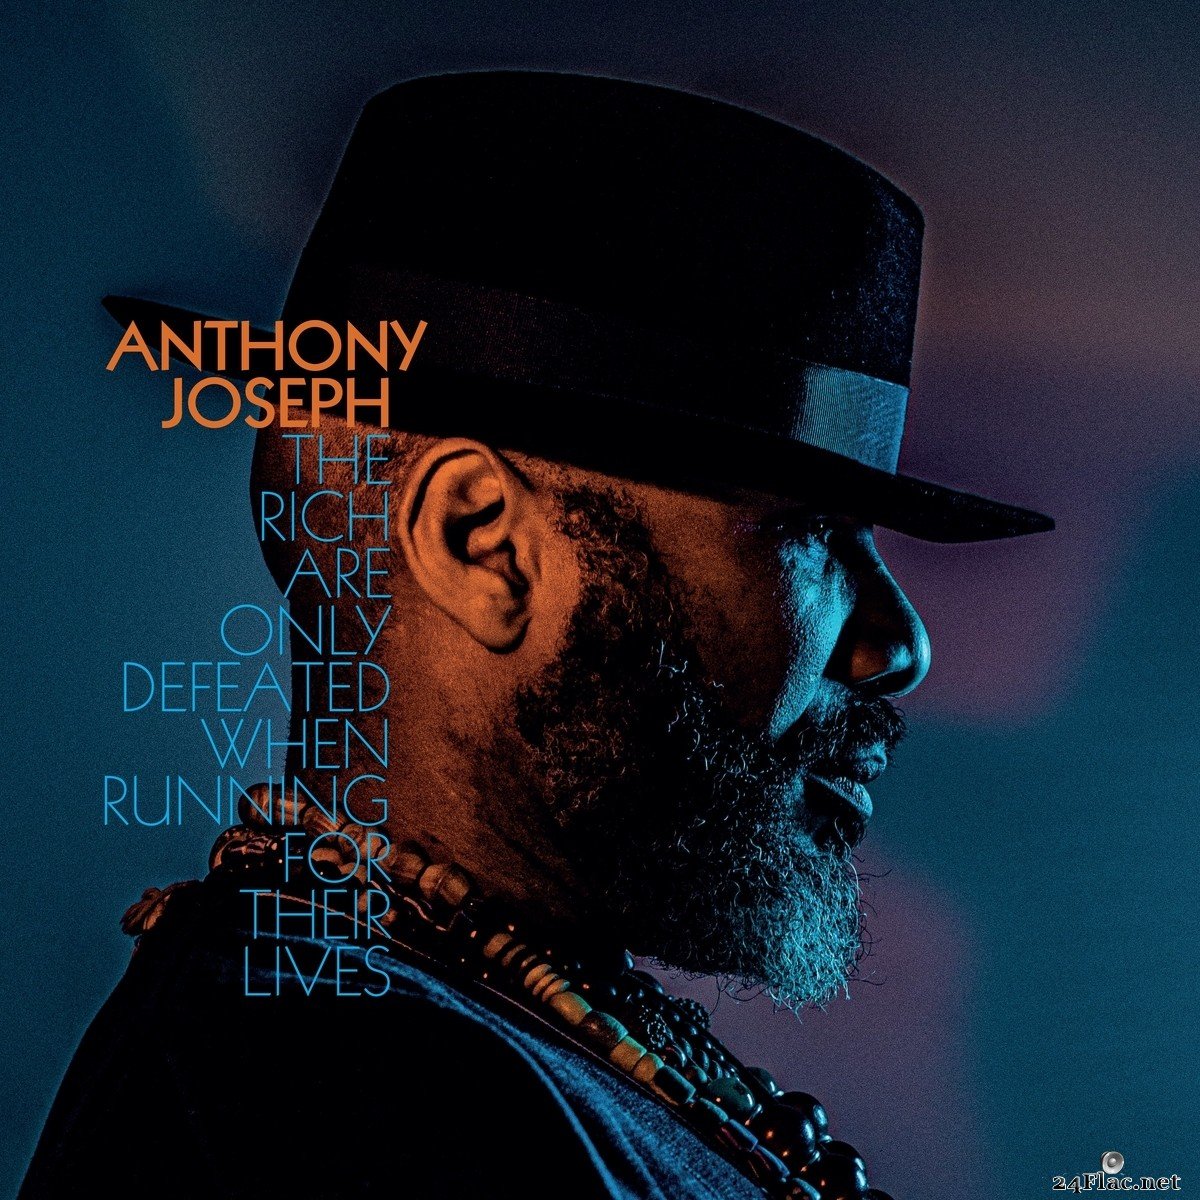 Anthony Joseph - The Rich Are Only Defeated When Running for Their Lives (2021) FLAC + Hi-Res